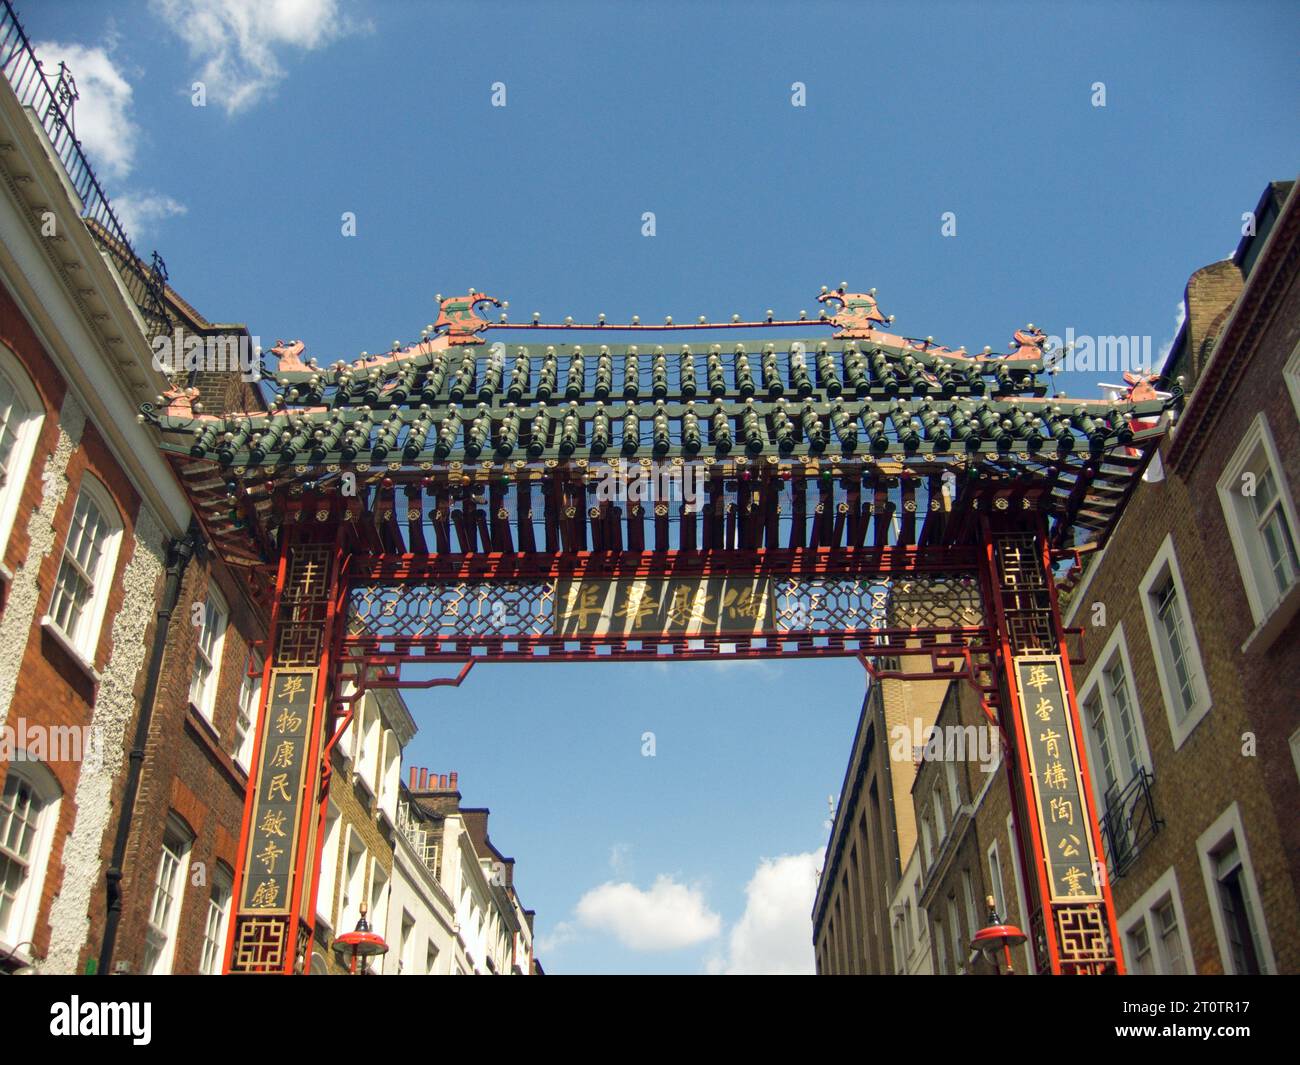 The Gate in chinatown,London, England. Stock Photo